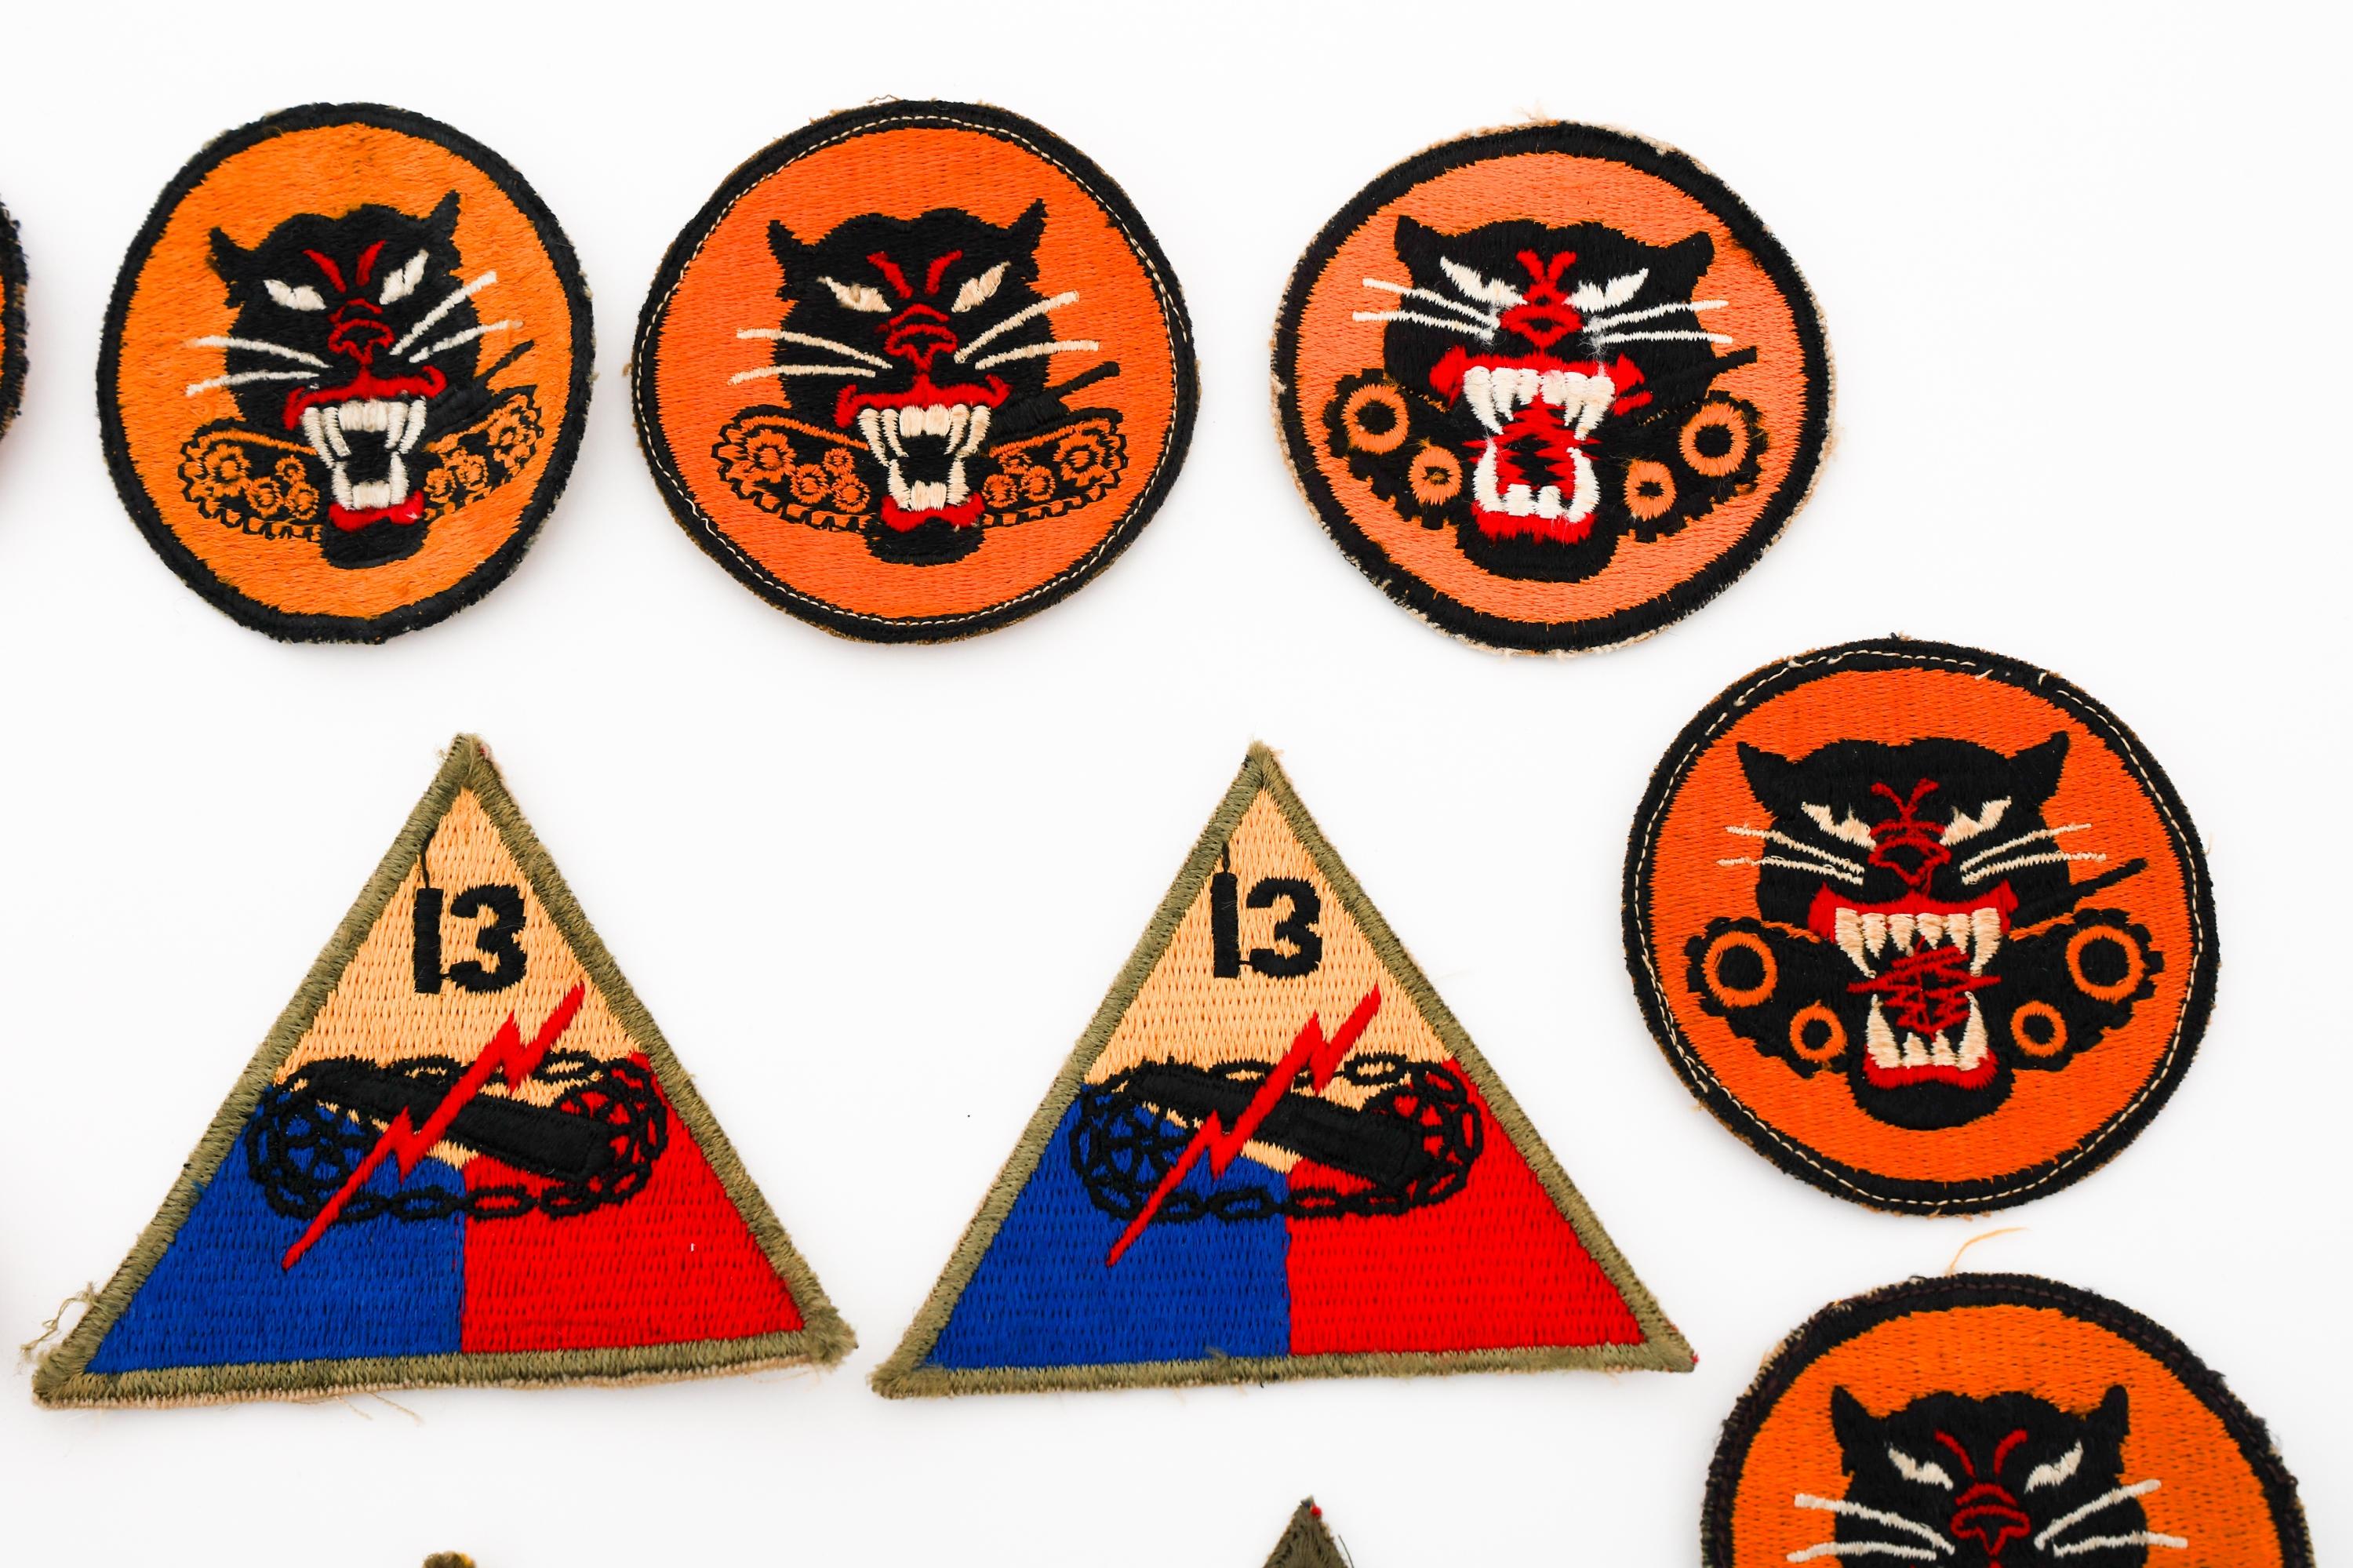 WWII US ARMY ARMORED DIV & TANK DESTROYER PATCHES